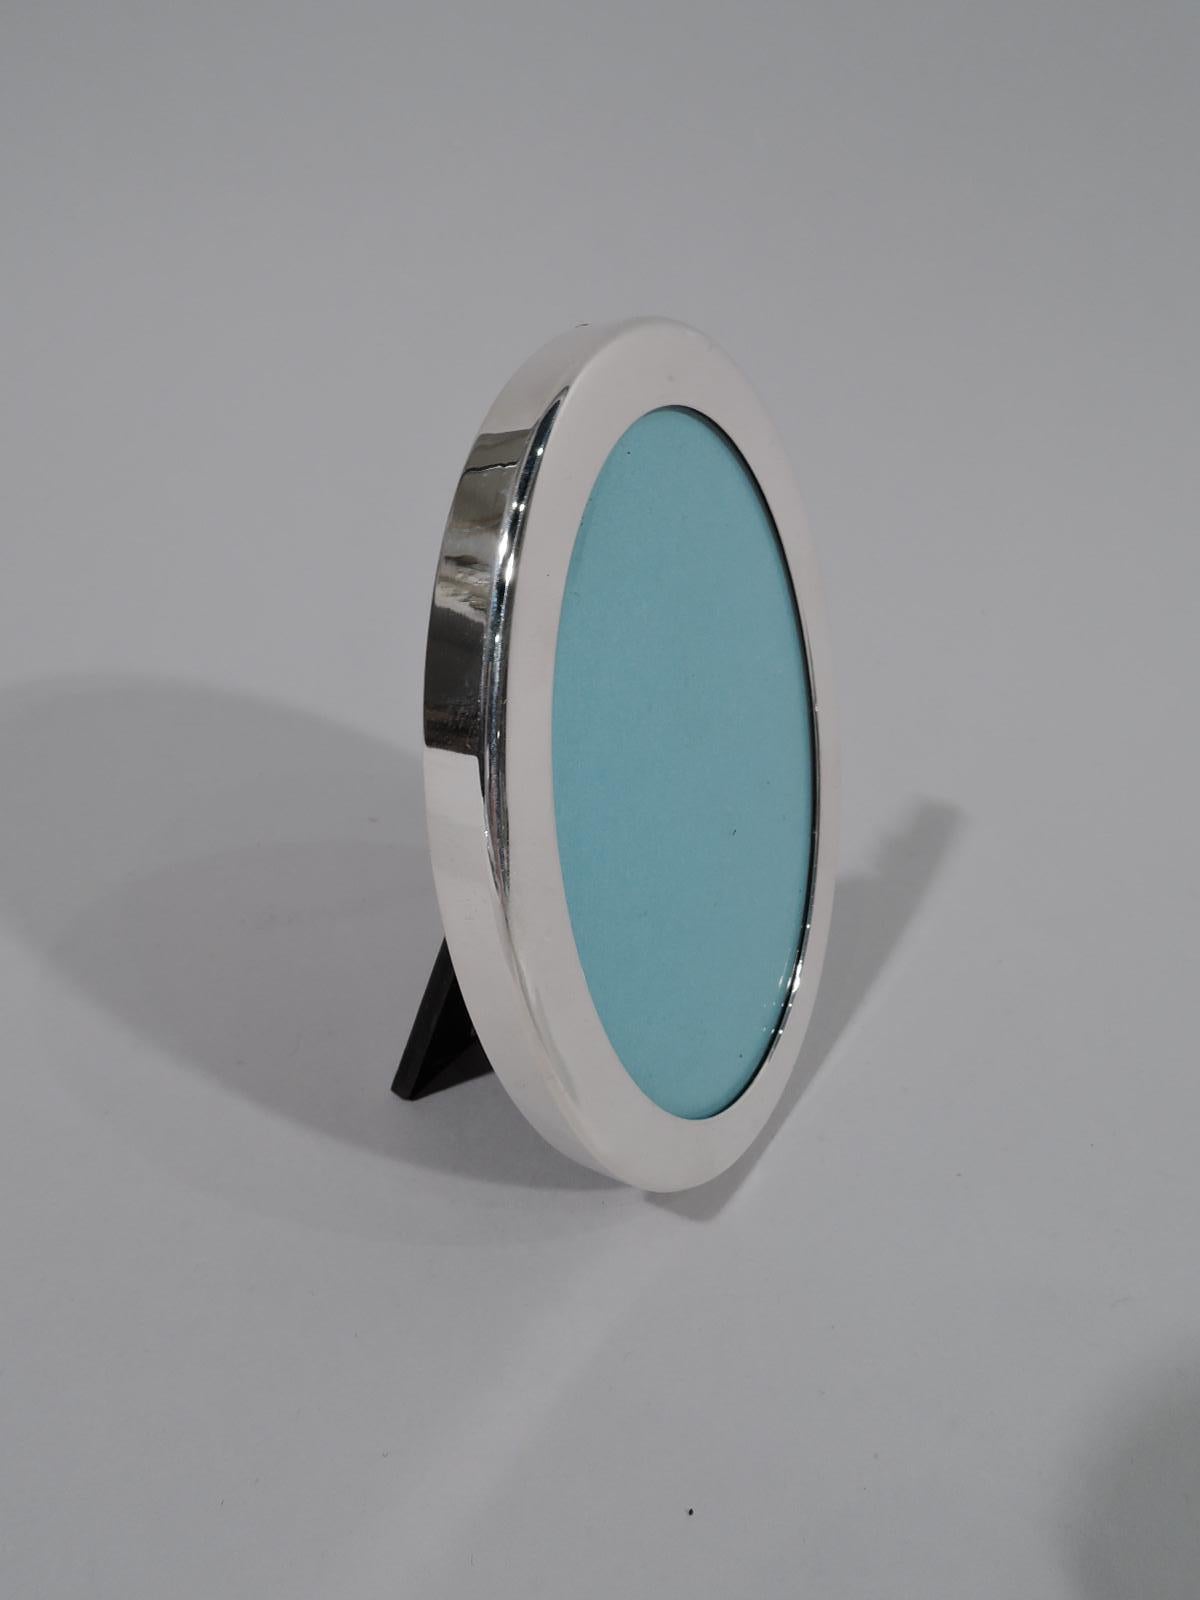 Small sterling silver picture frame. Retailed by Tiffany & Co. in New York. Oval window and flat surround. With glass, eggshell-blue lining, and laminate back and hinged support. Marked “Tiffany & Co. / Sterling” and post-1967 Italian hallmark for